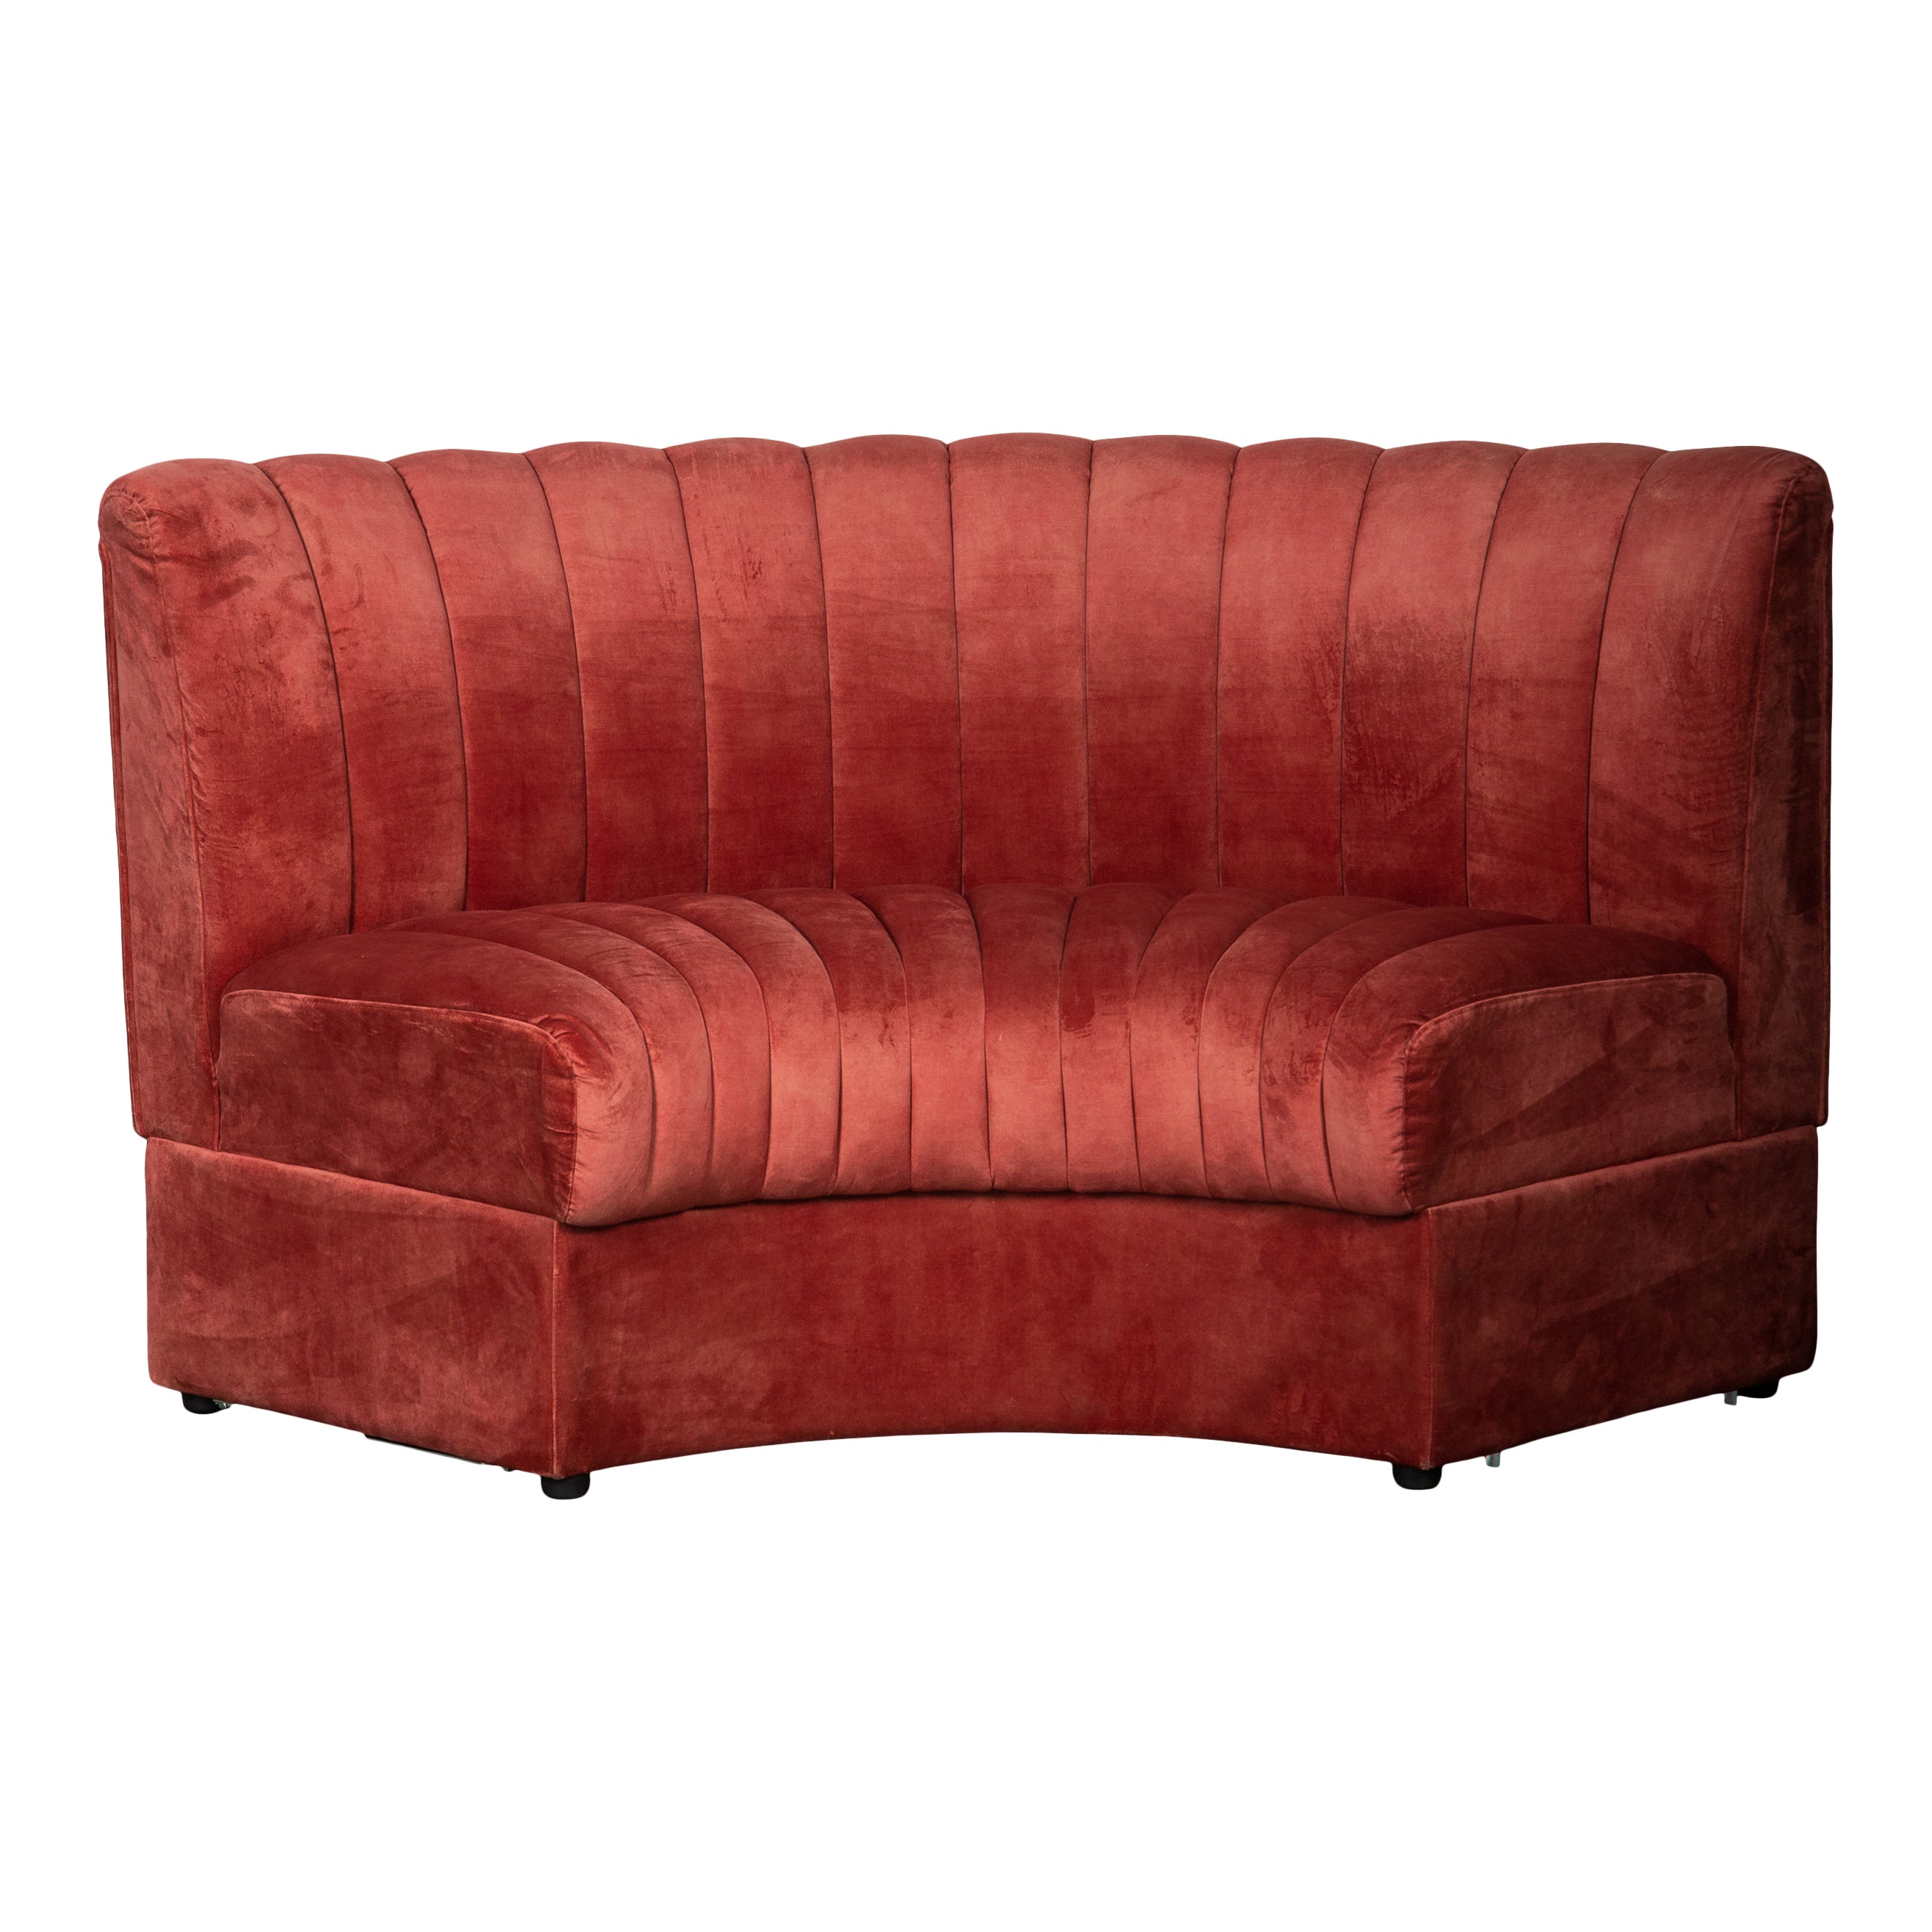 Thelma Banquette Couch